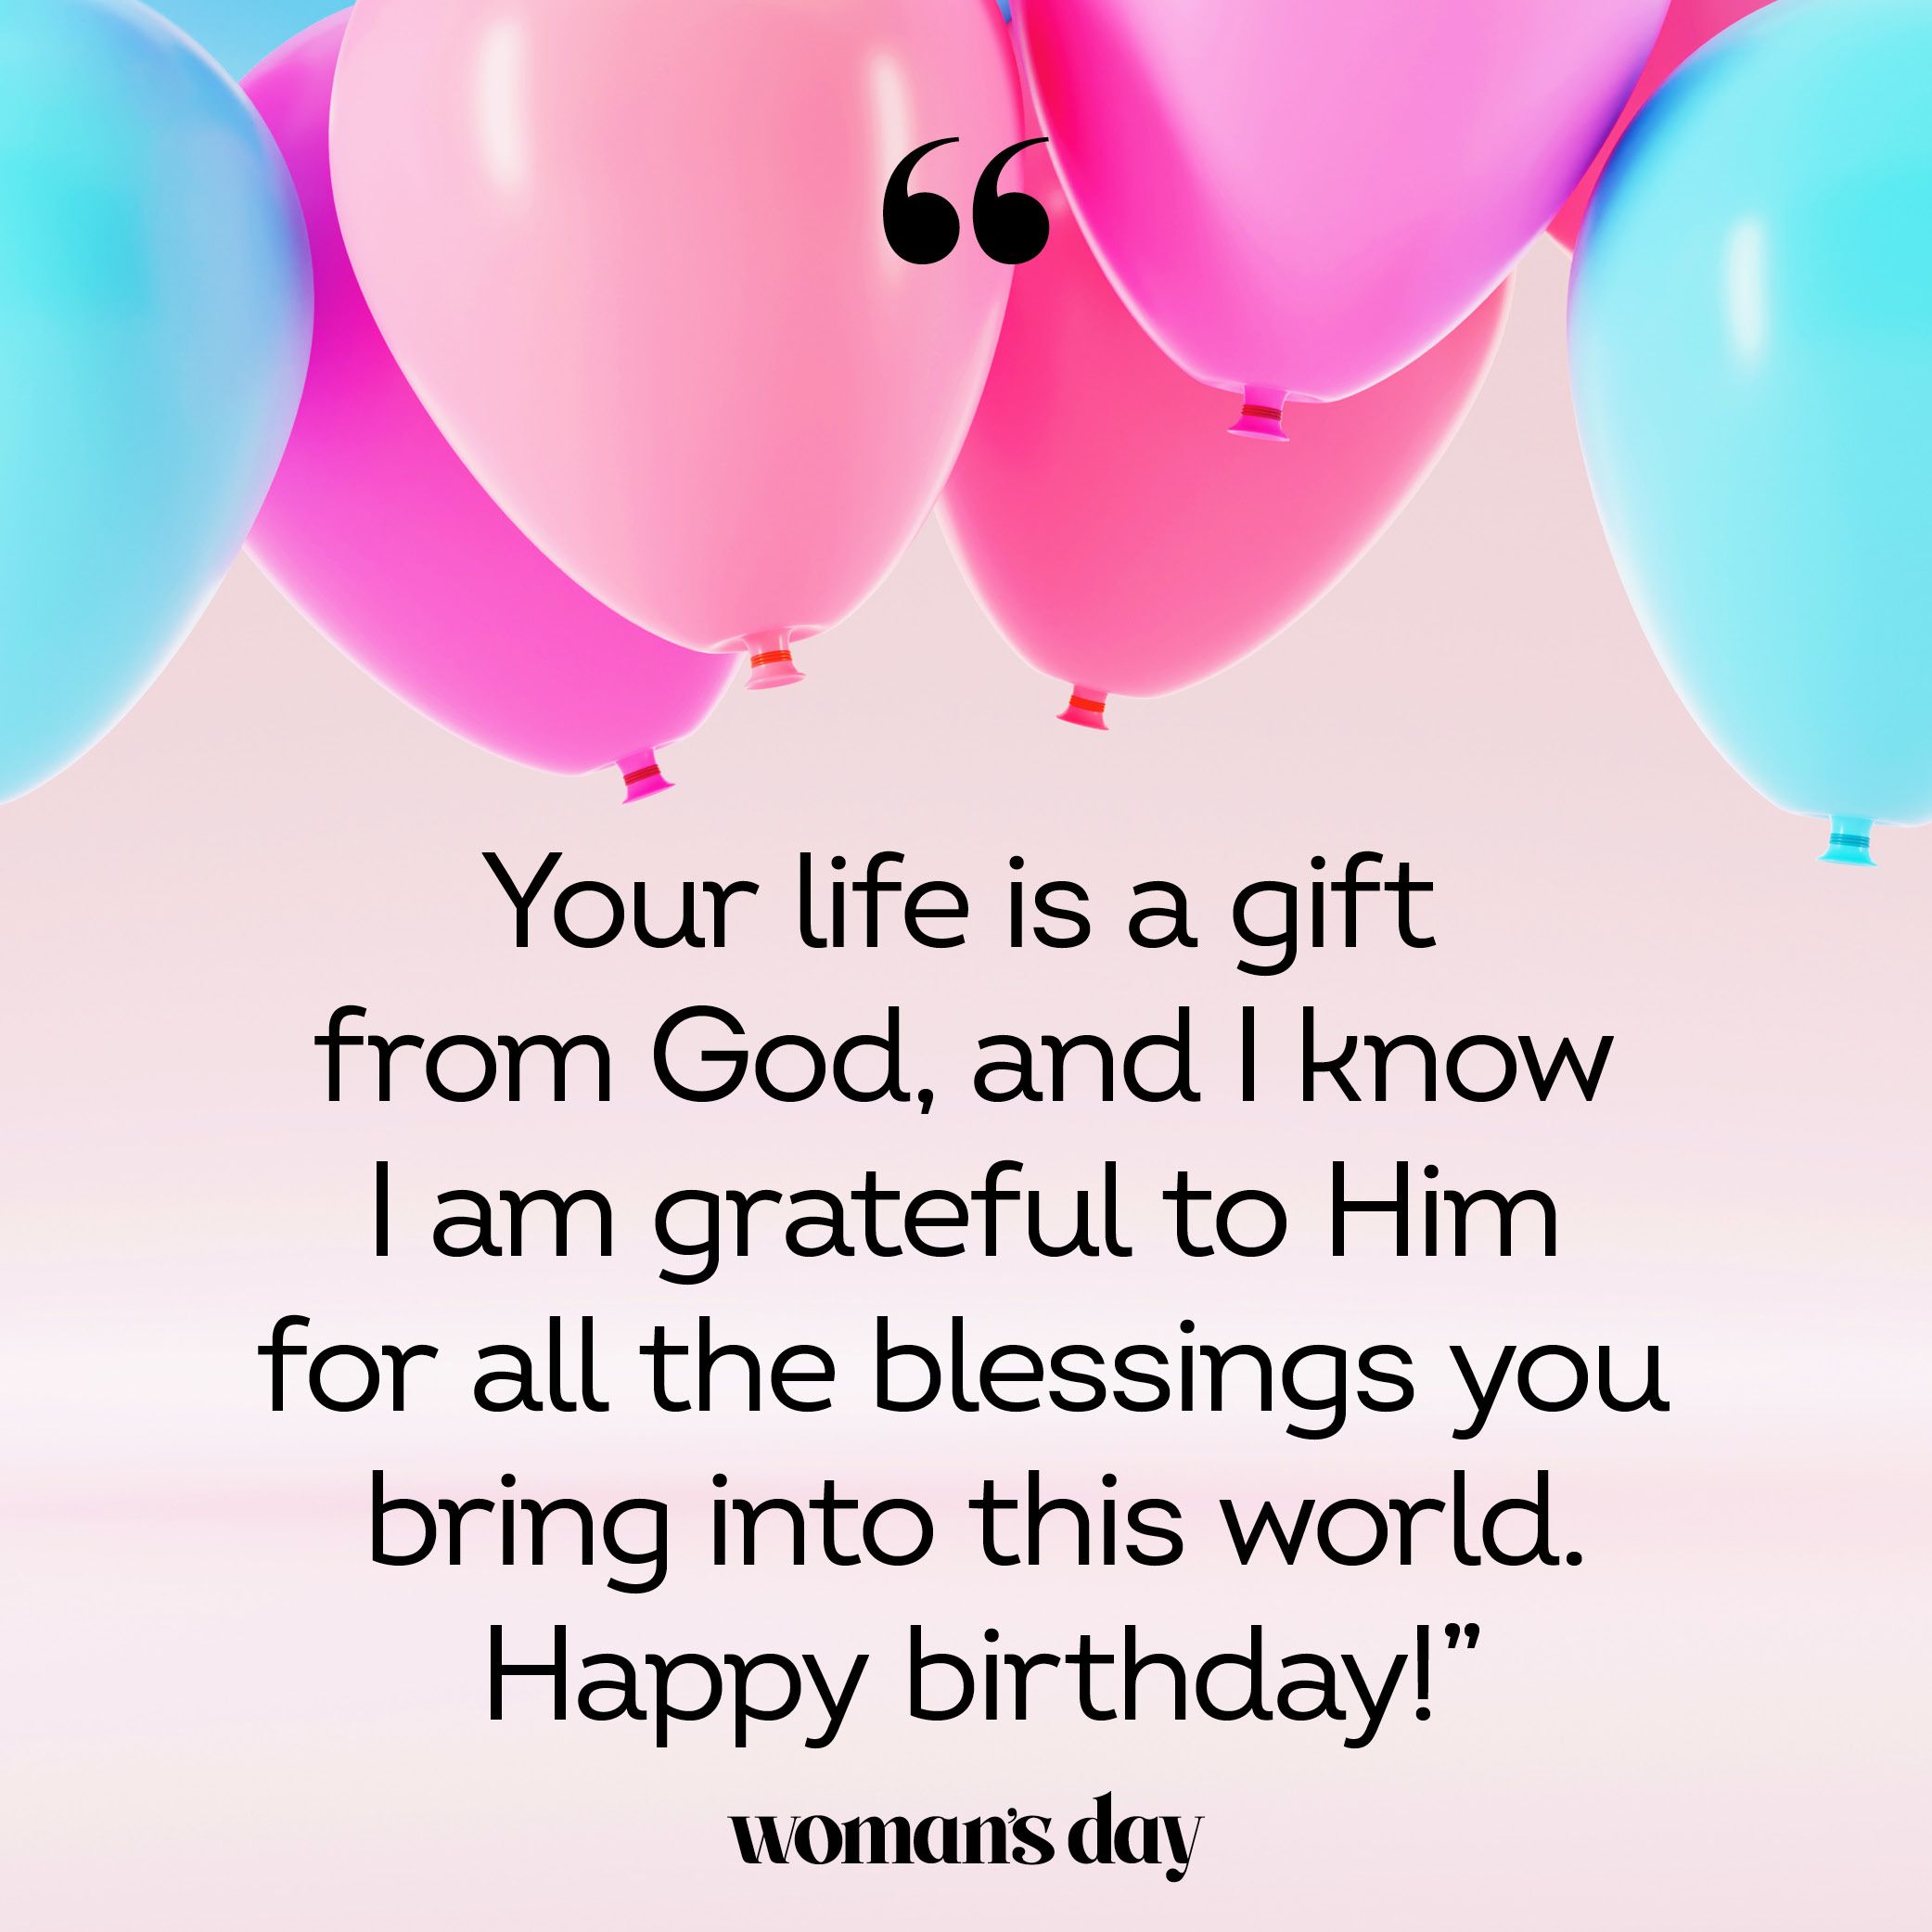 Image: Happy Birthday images for your friend